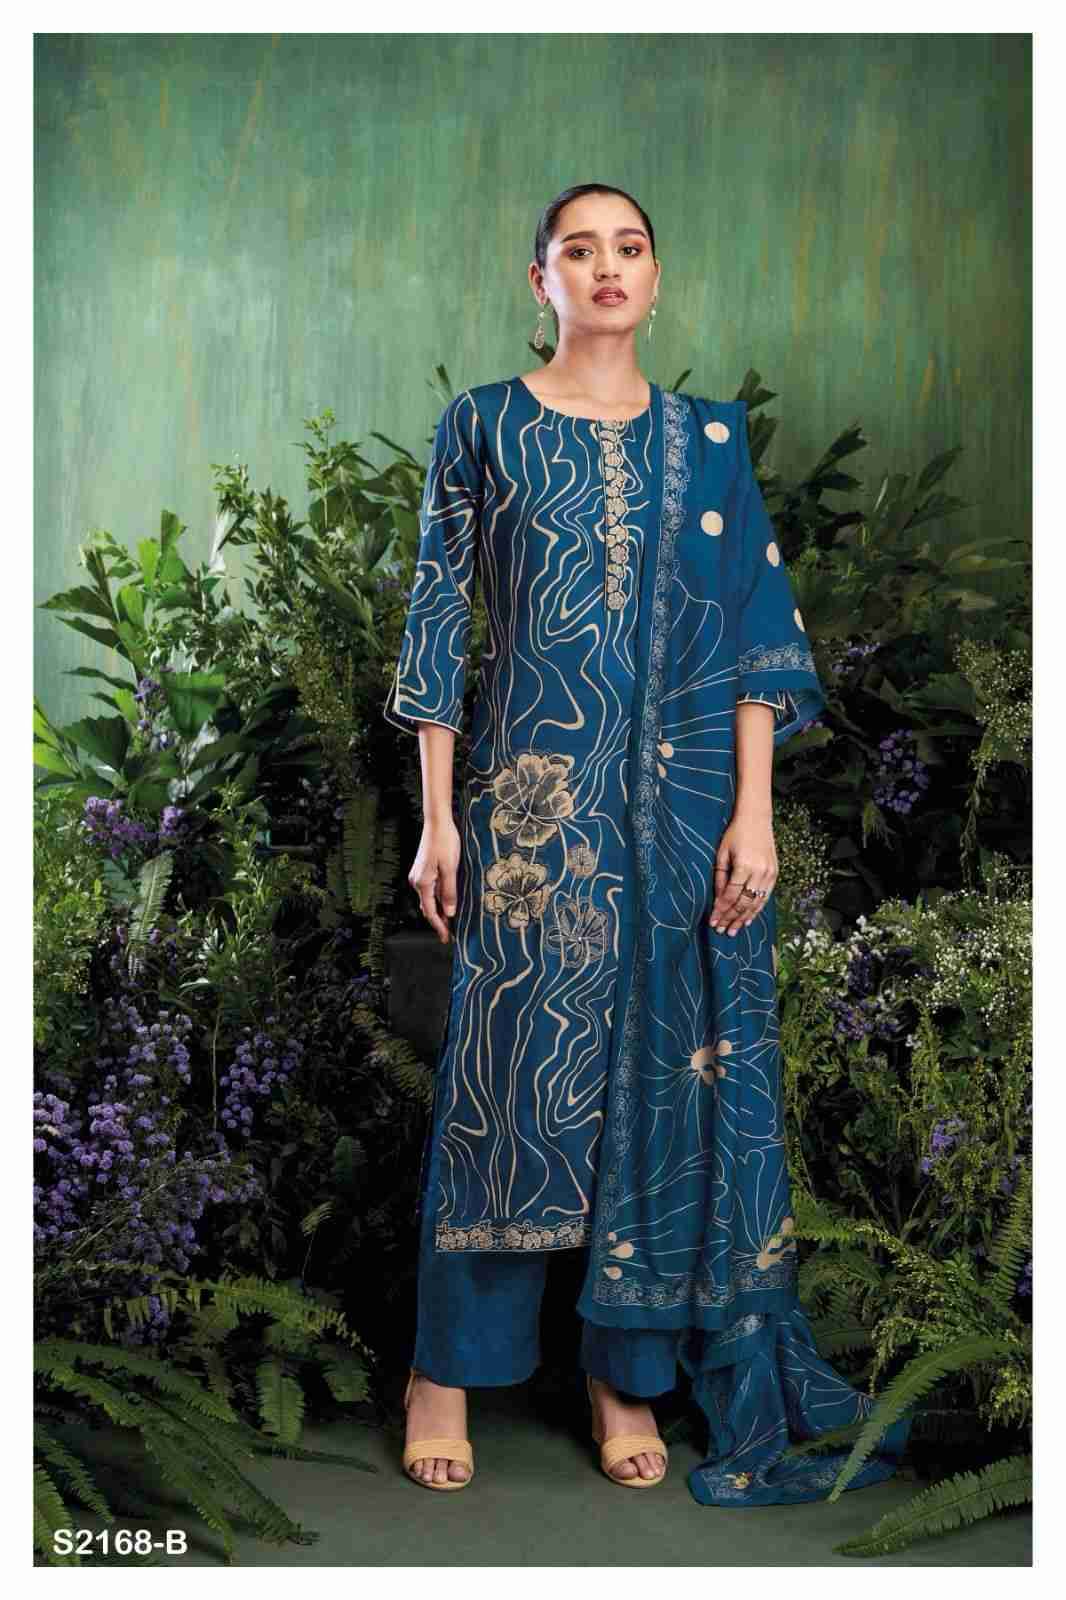 Lennox-2168 By Ganga Fashion 2168-A To 2168-D Series Beautiful Festive Suits Colorful Stylish Fancy Casual Wear & Ethnic Wear Cotton Silk Dresses At Wholesale Price